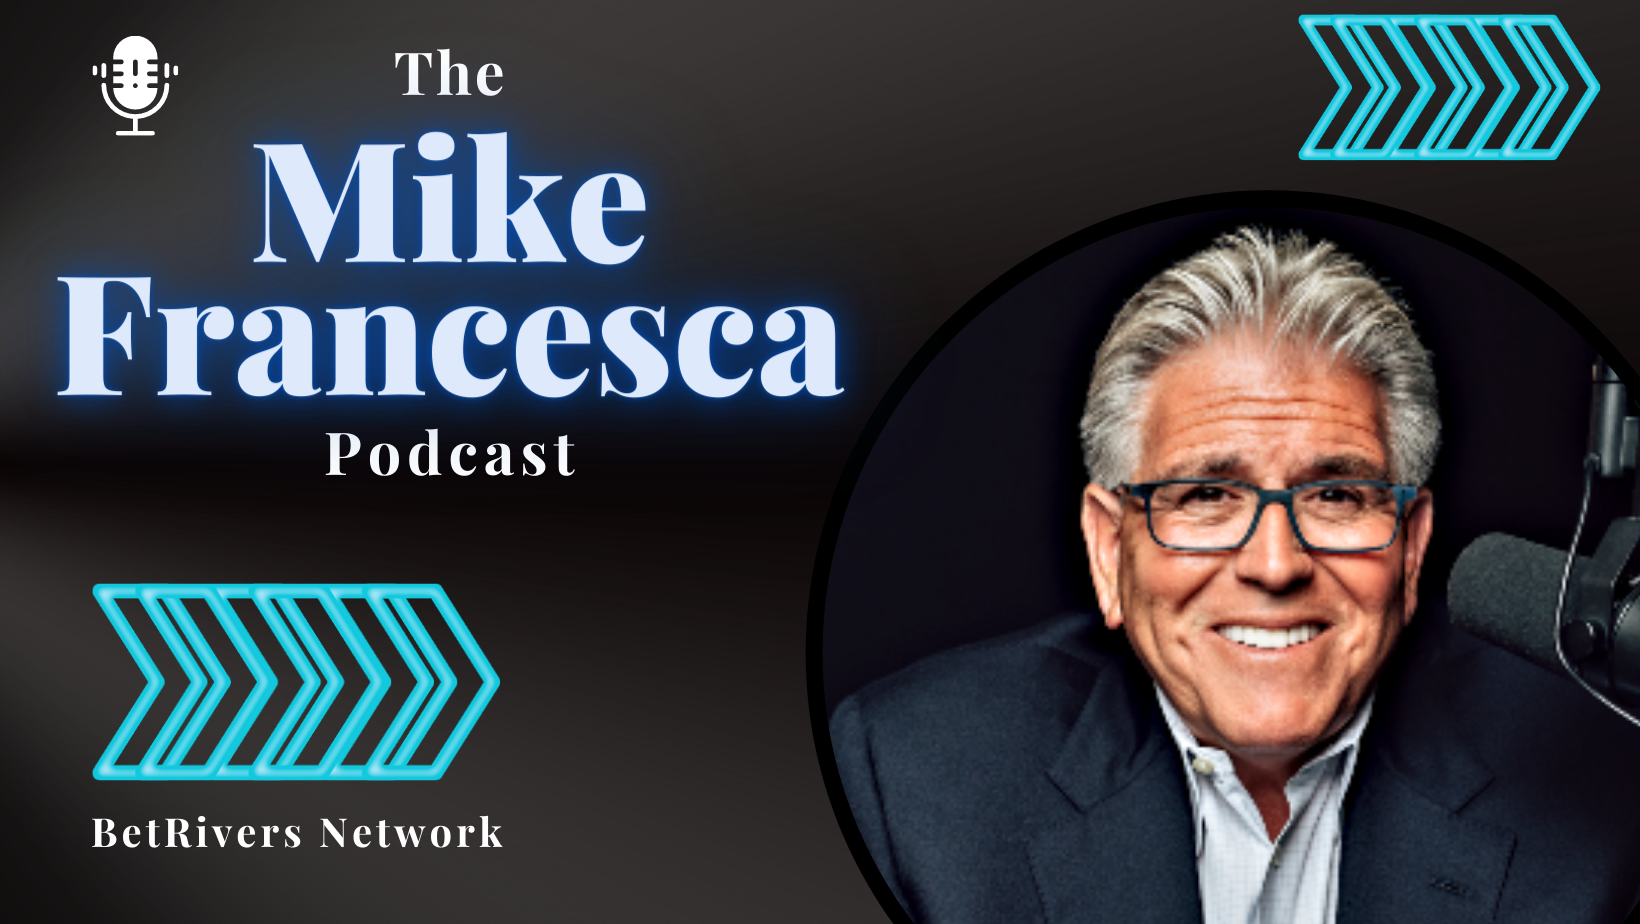 The Mike Francesa Podcast Review